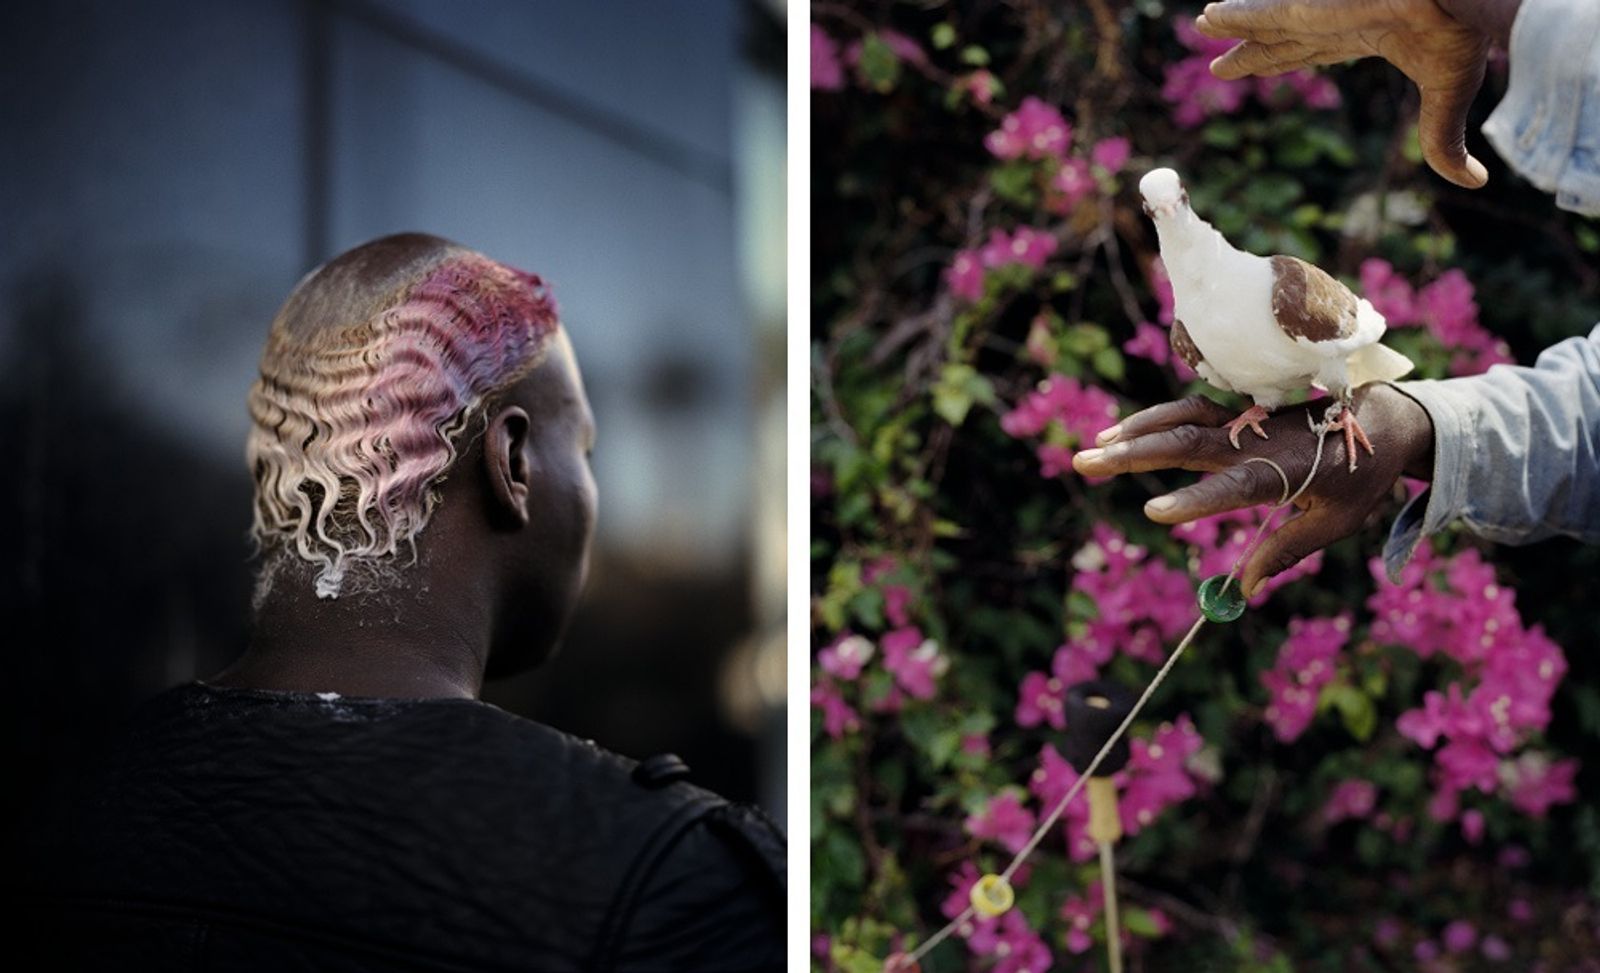 © Gregory Halpern, from the book ZZYZX (Winner of the 2016 PhotoBook of the Year Prize)